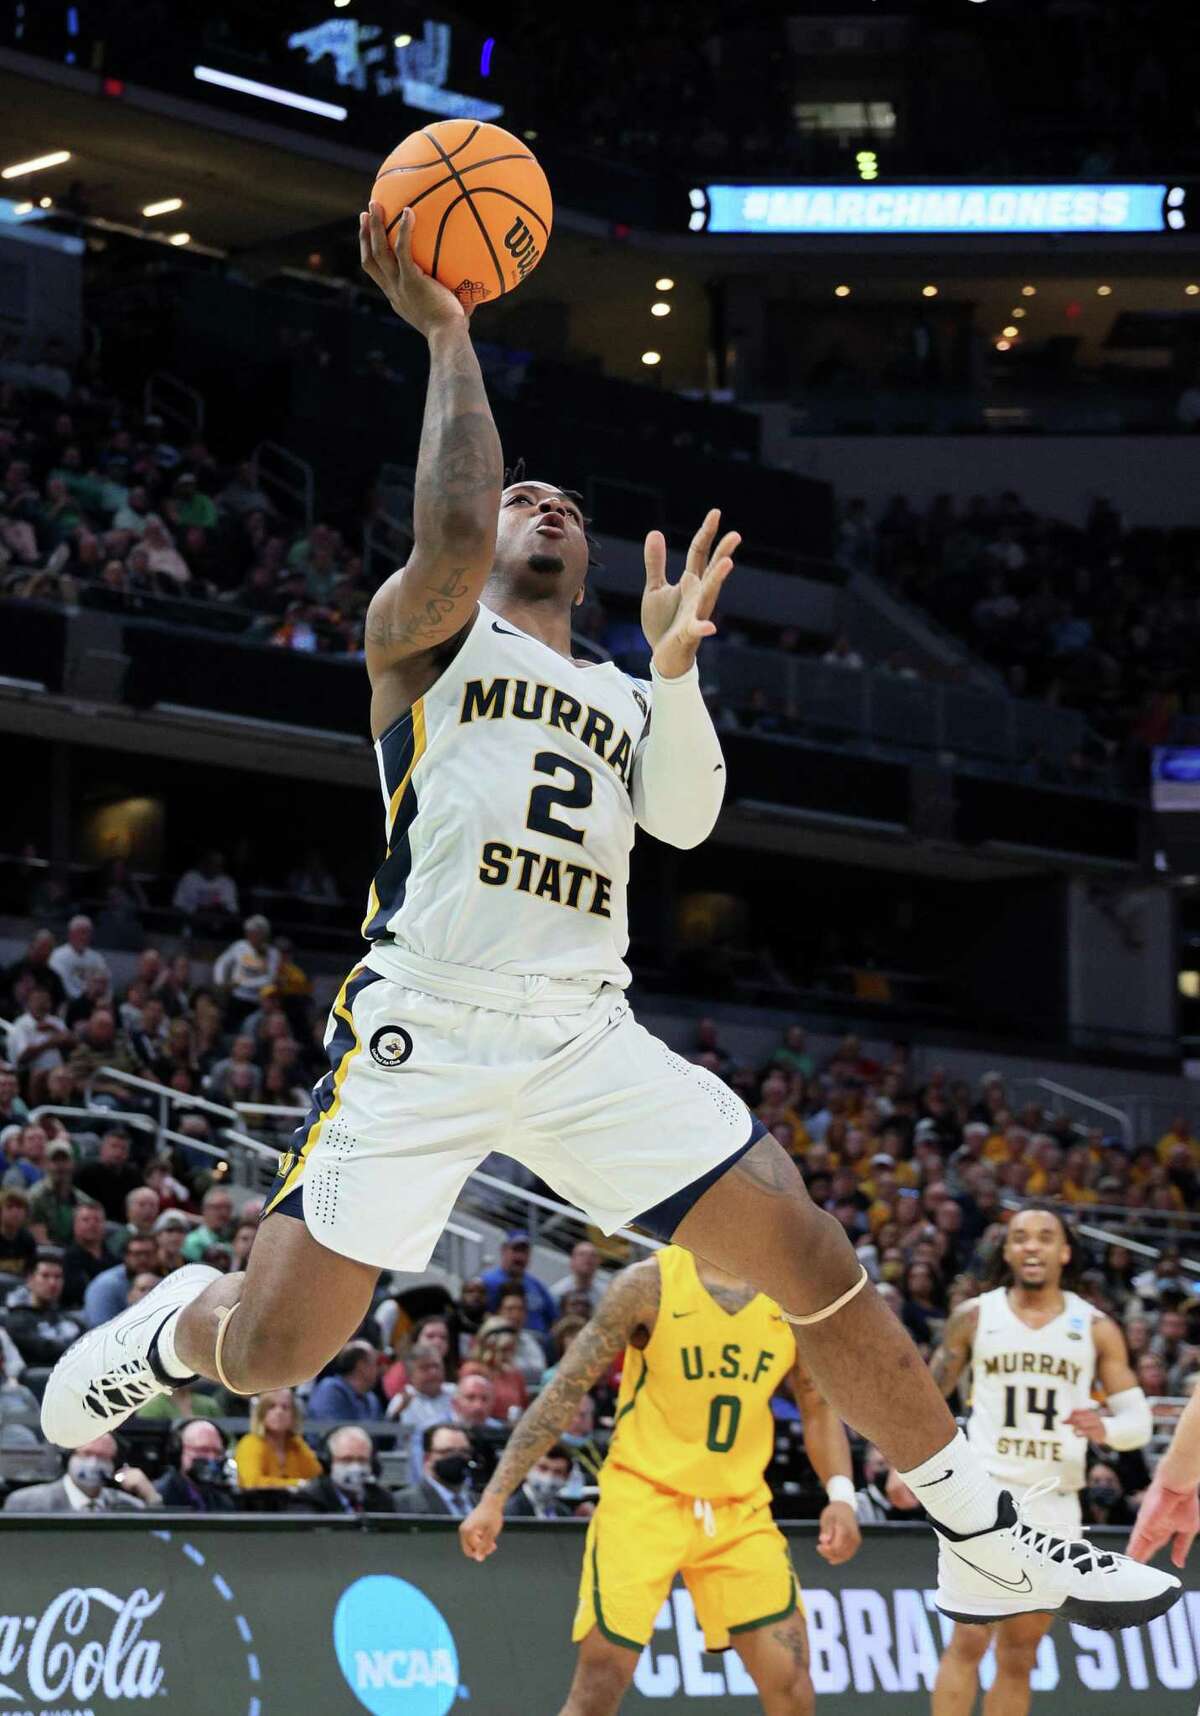 INDIANAPOLIS, INDIANA - MARCH 17: Trae Hannibal #2 of the Murray State Racers shoots the ball against the San Francisco Dons during the first half in the first round game of the 2022 NCAA Men's Basketball Tournament at Gainbridge Fieldhouse on March 17, 2022 in Indianapolis, Indiana. (Photo by Andy Lyons/Getty Images)